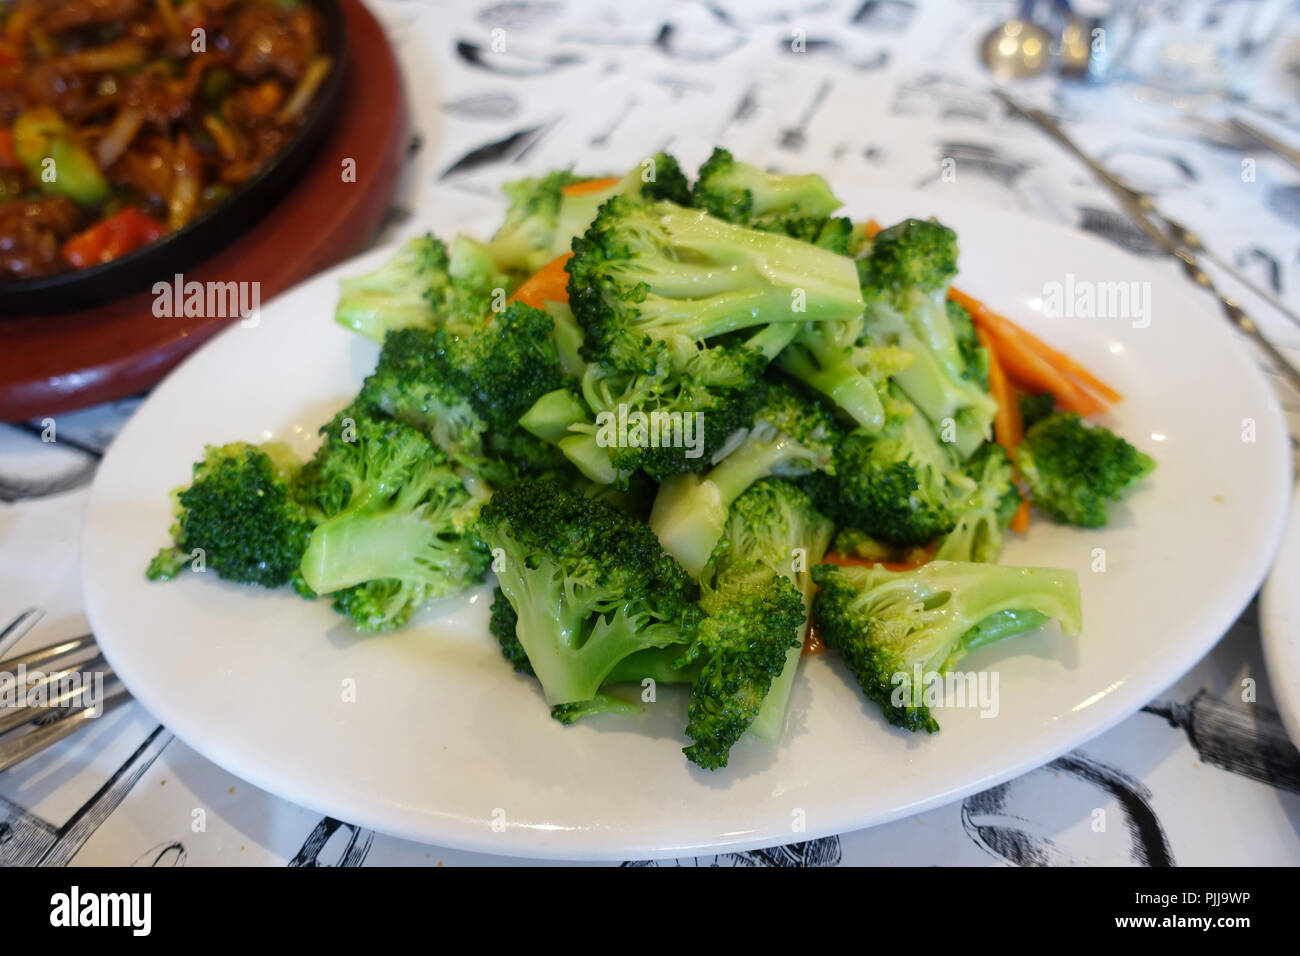 Stir fry broccoli and carrot on white plate Stock Photo